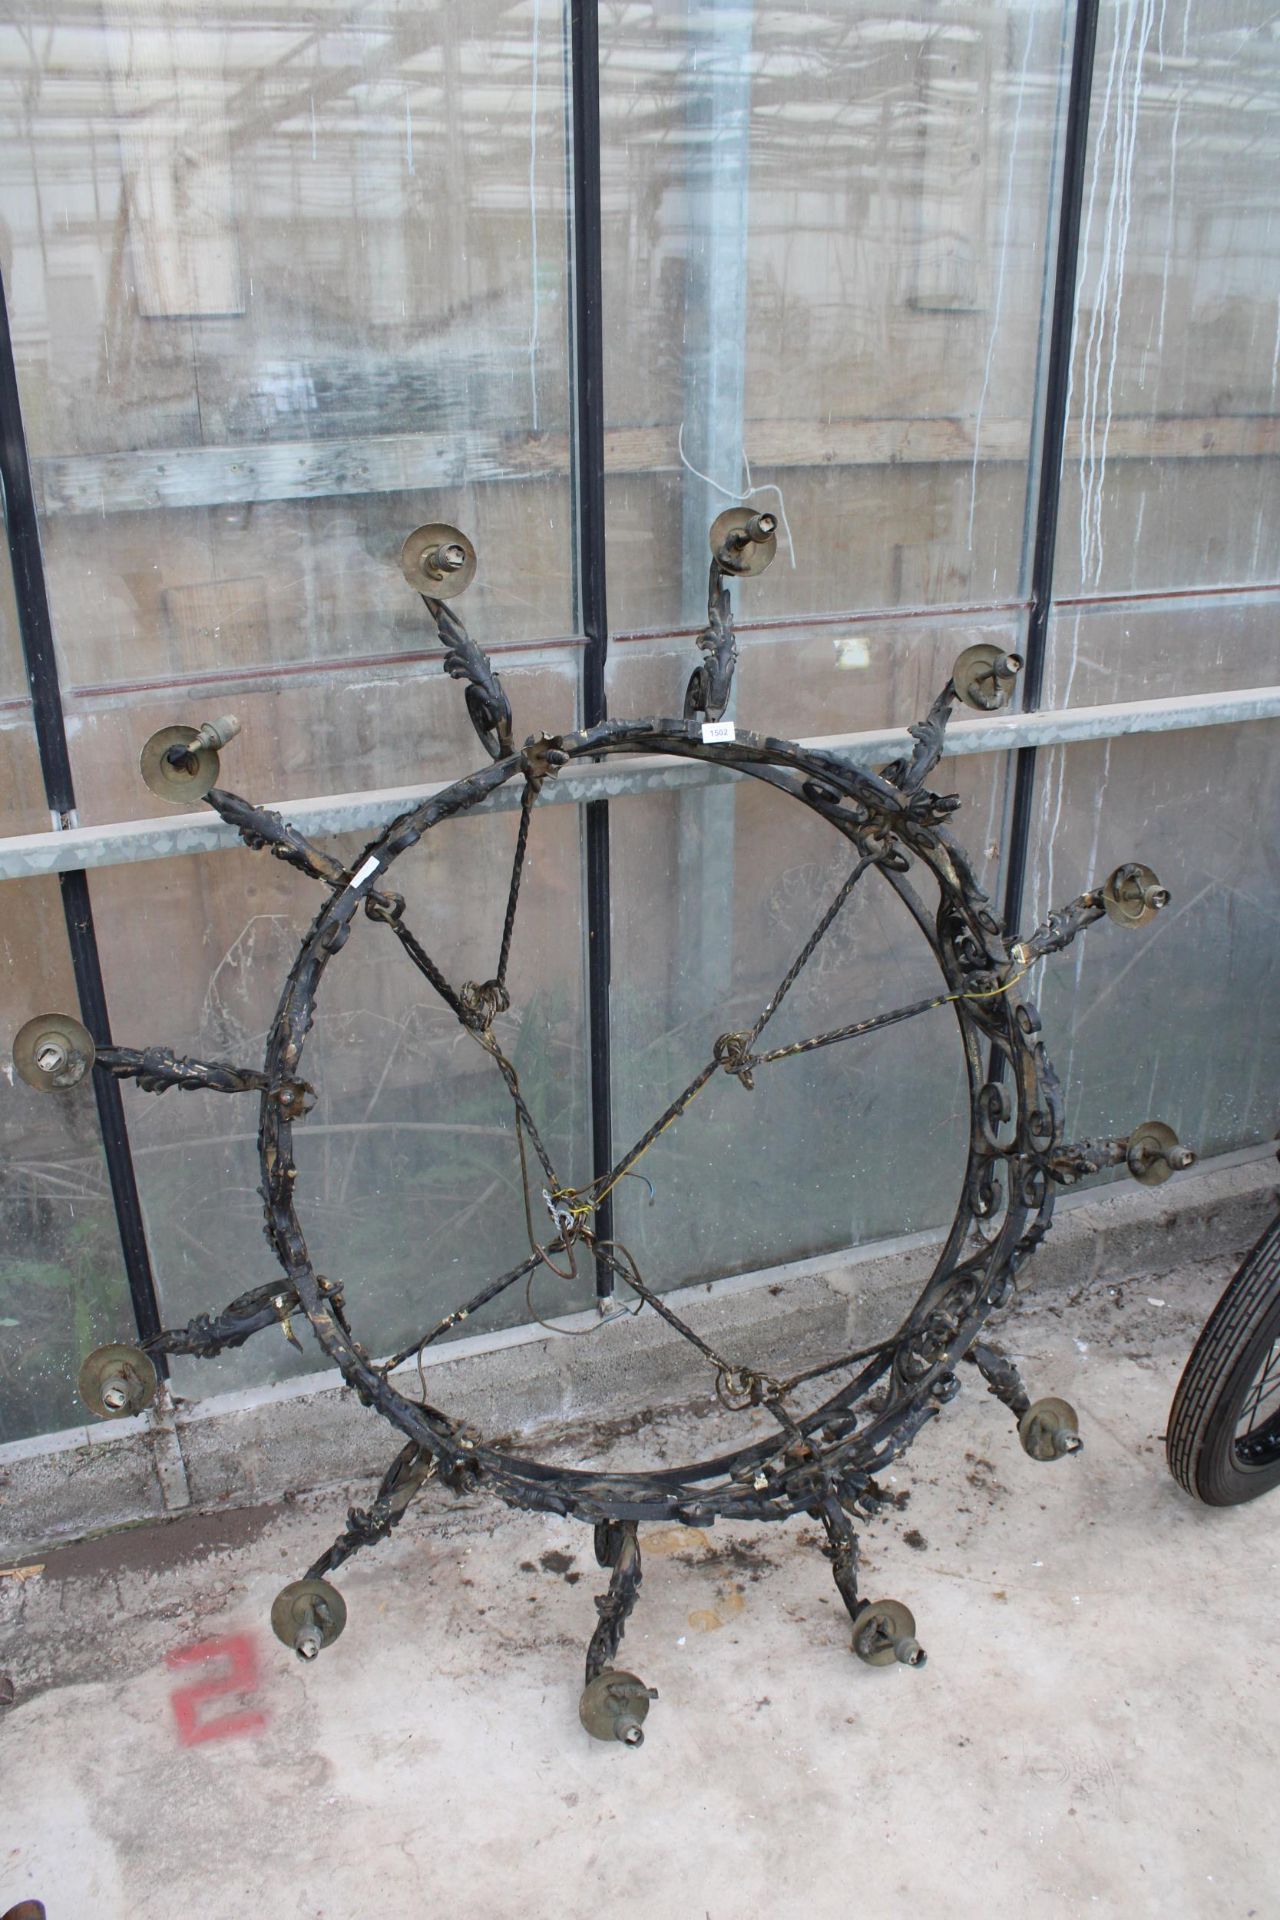 A LARGE HEAVY WROUGHT IRON 12 BRANCH CEILING LIGHT FITTING WITH HANGING BARS (D:146CM)